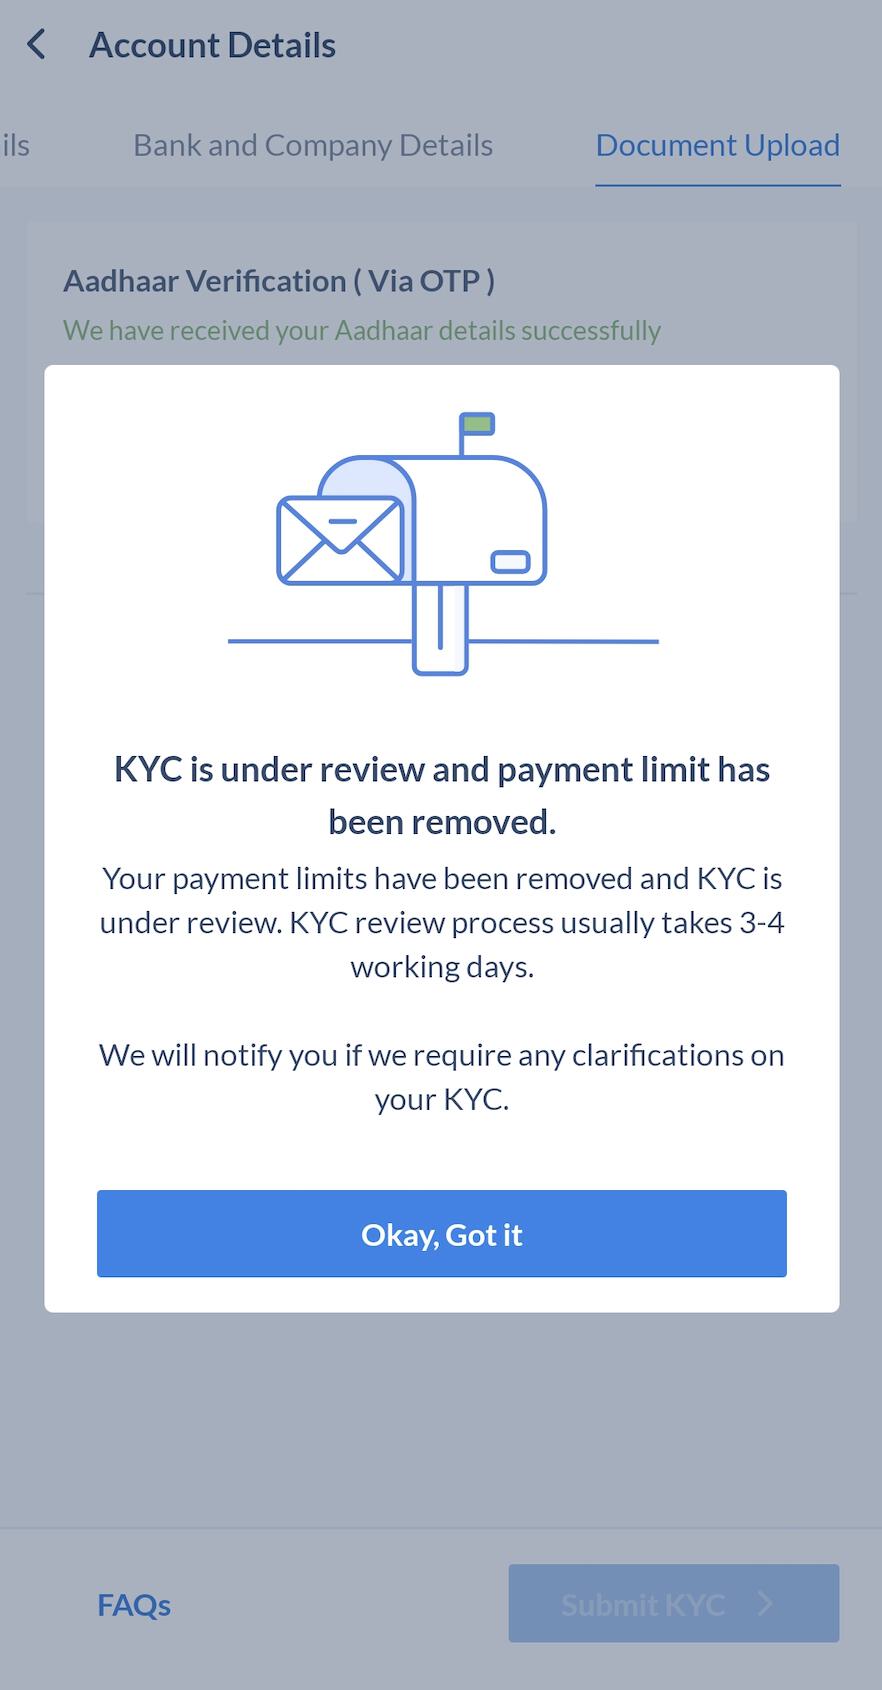 KYC under review - Clarifications needed on Razorpay Dashboard